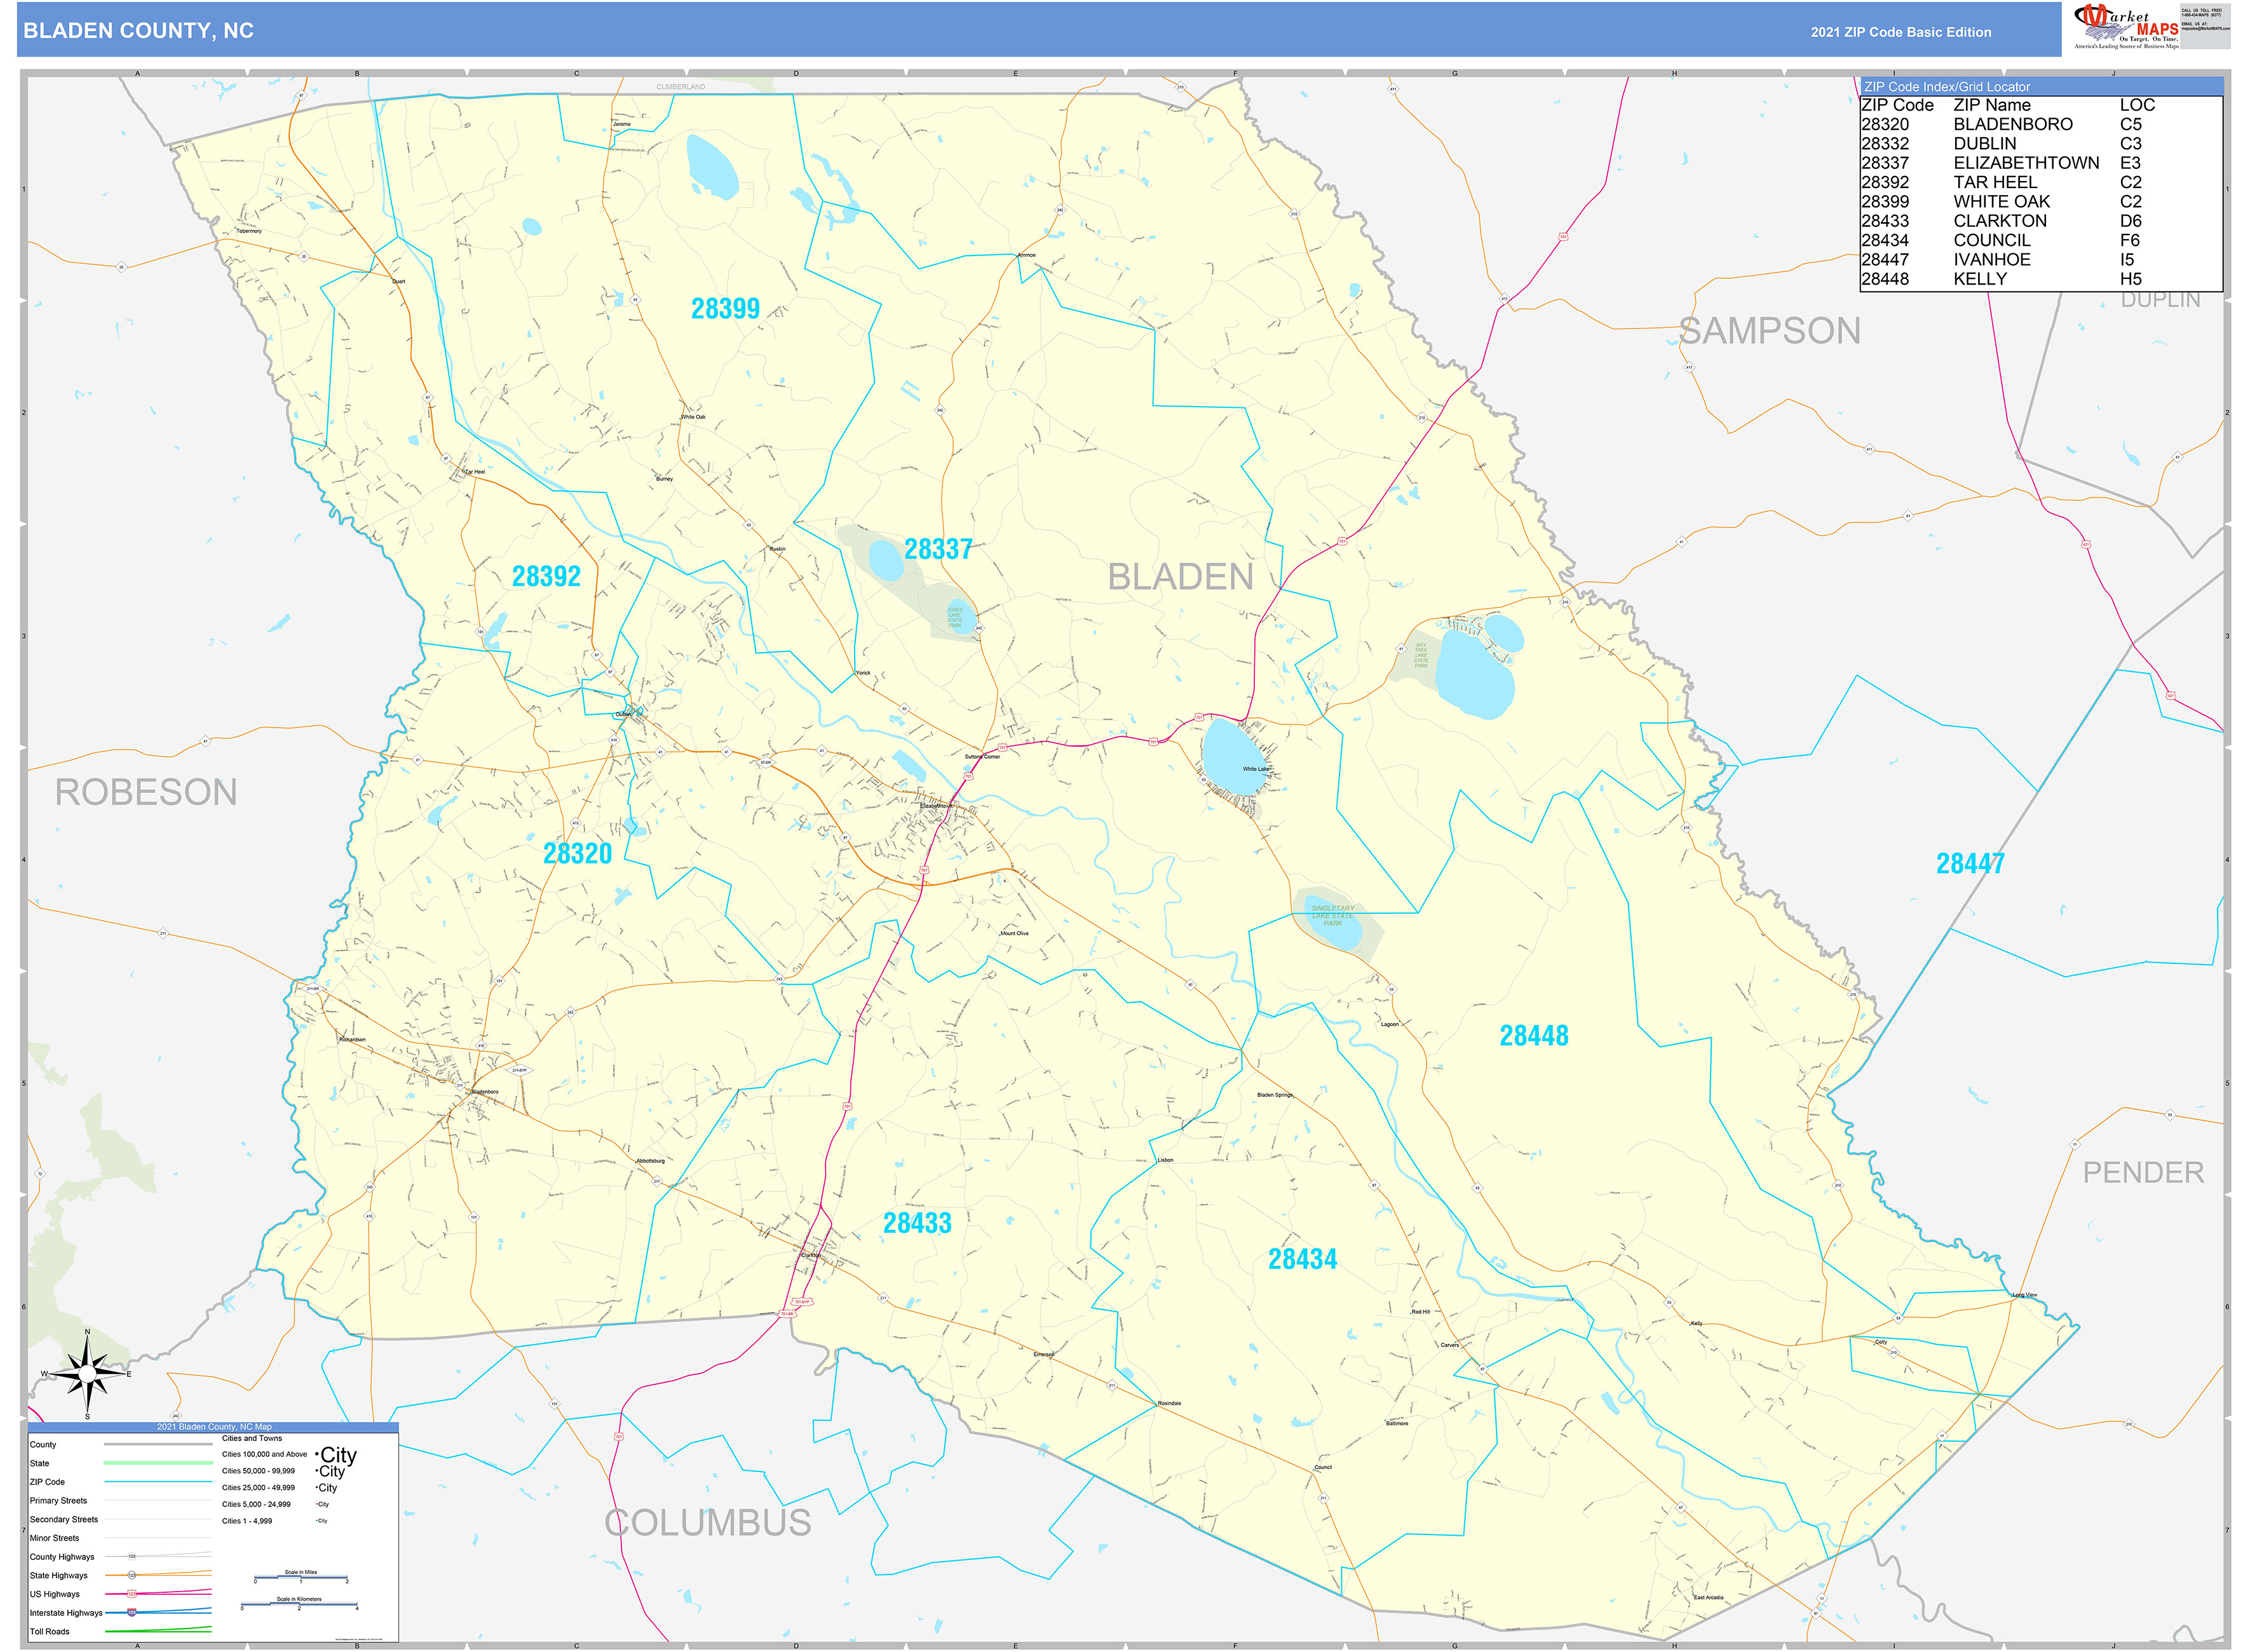 Bladen County, NC Zip Code Wall Map Basic Style by MarketMAPS